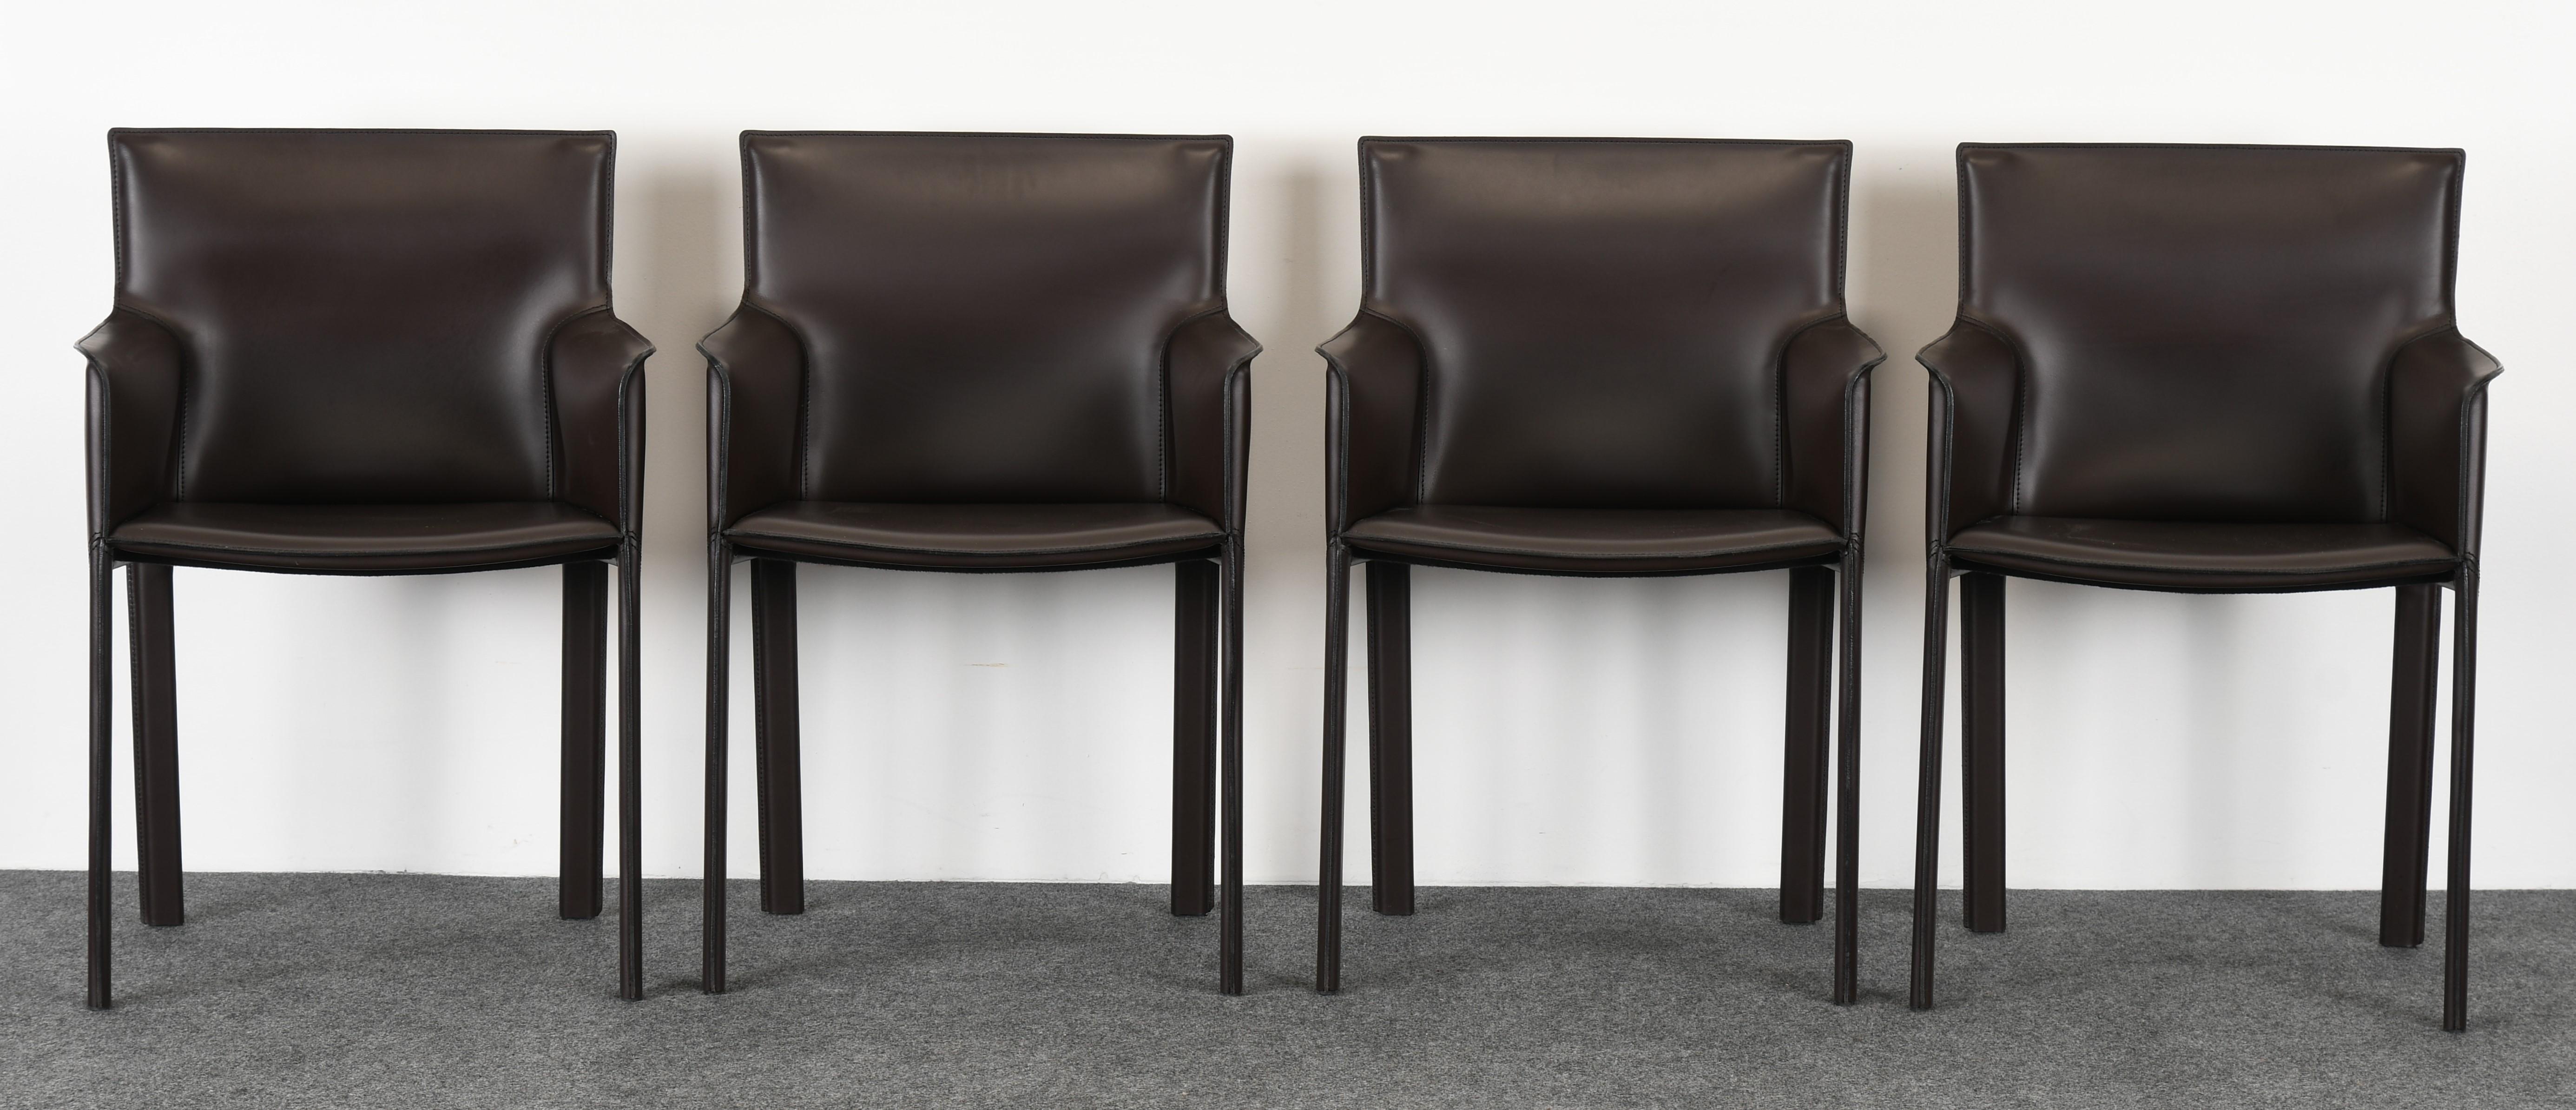 Minimalist Four Leather Dining Chairs by Enrico Pellizzoni, 2000s